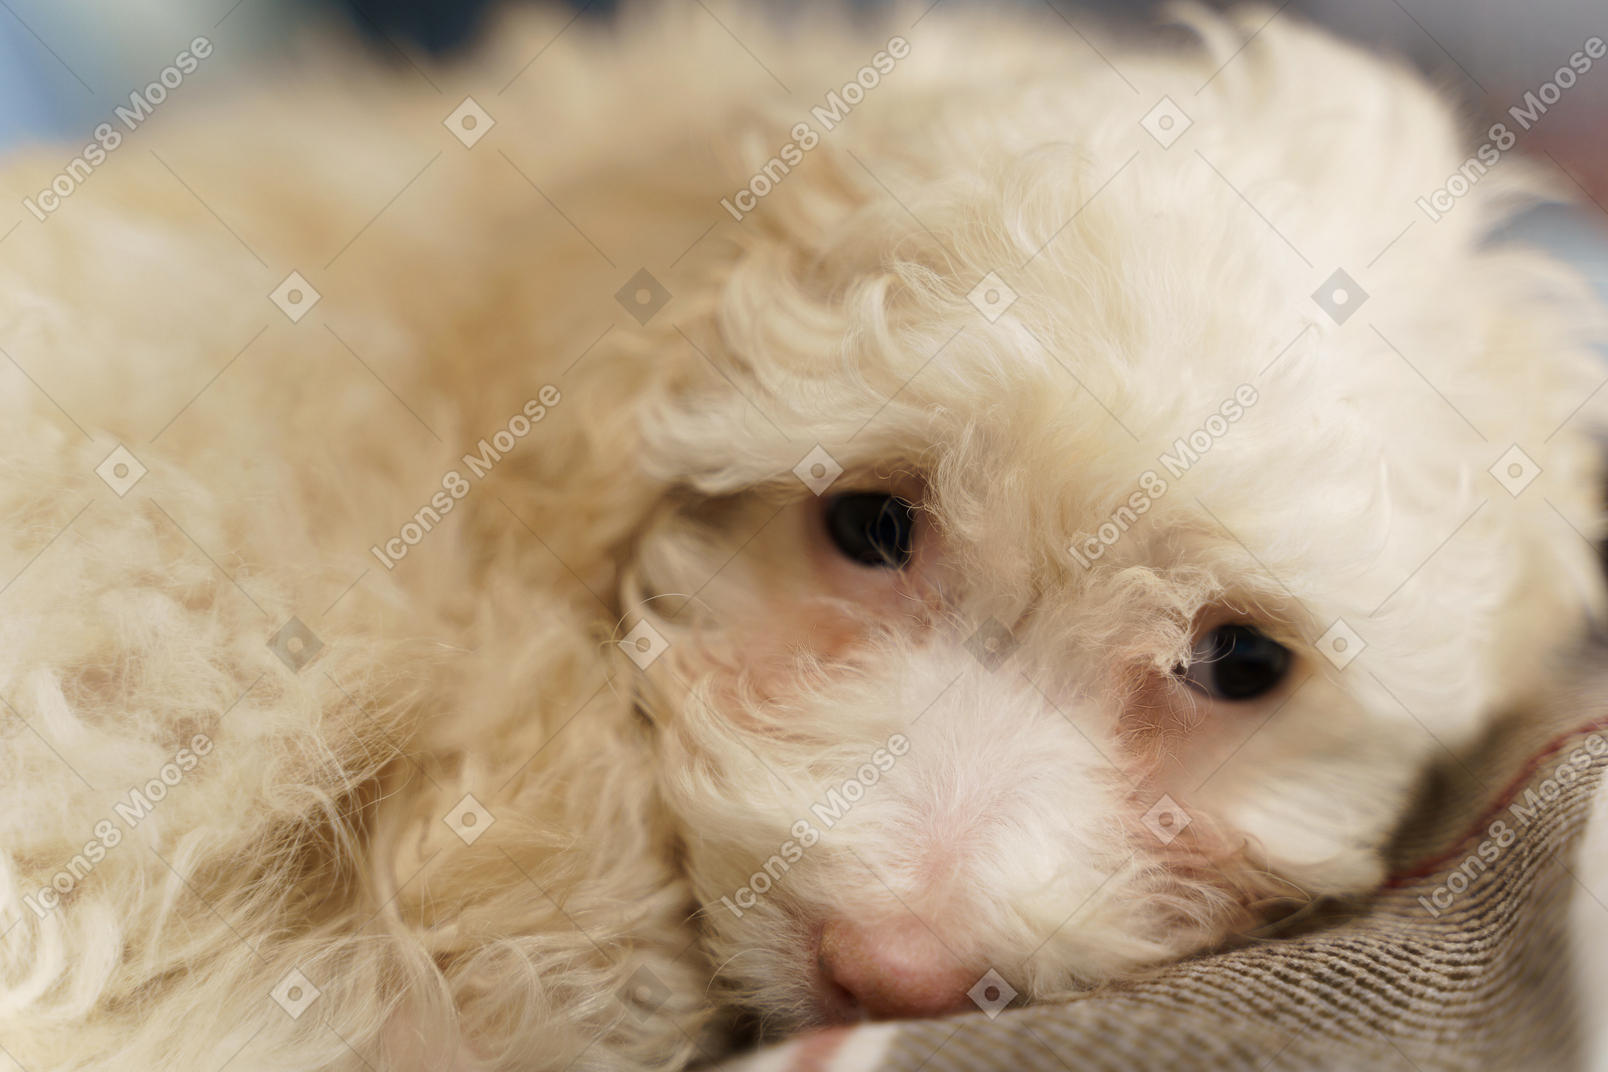 Lose-up of a white poodle lying on a checked blanket